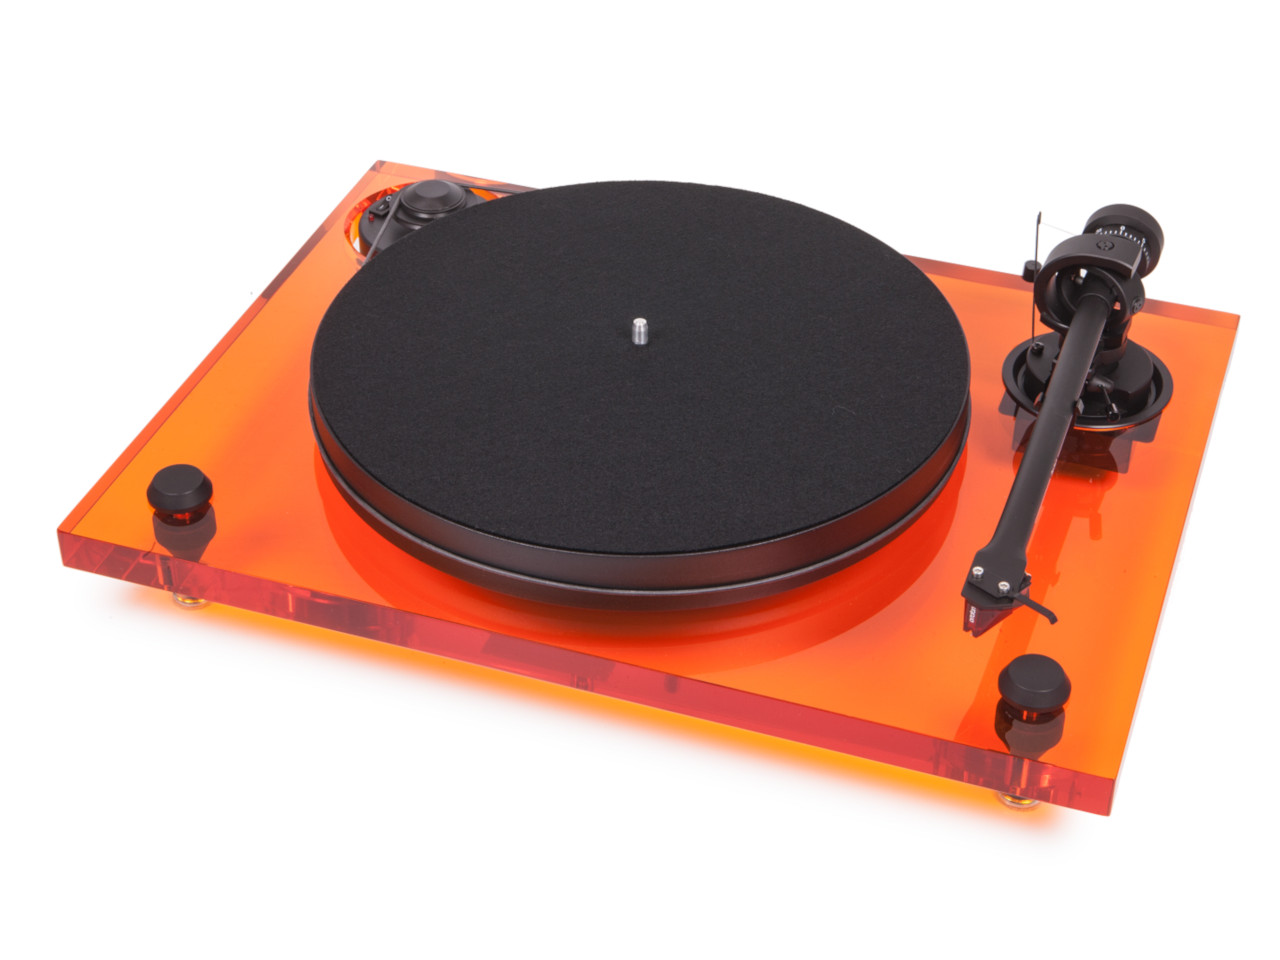 Pro-Ject 2Xperience Primary Acryl Orange (discontinued)